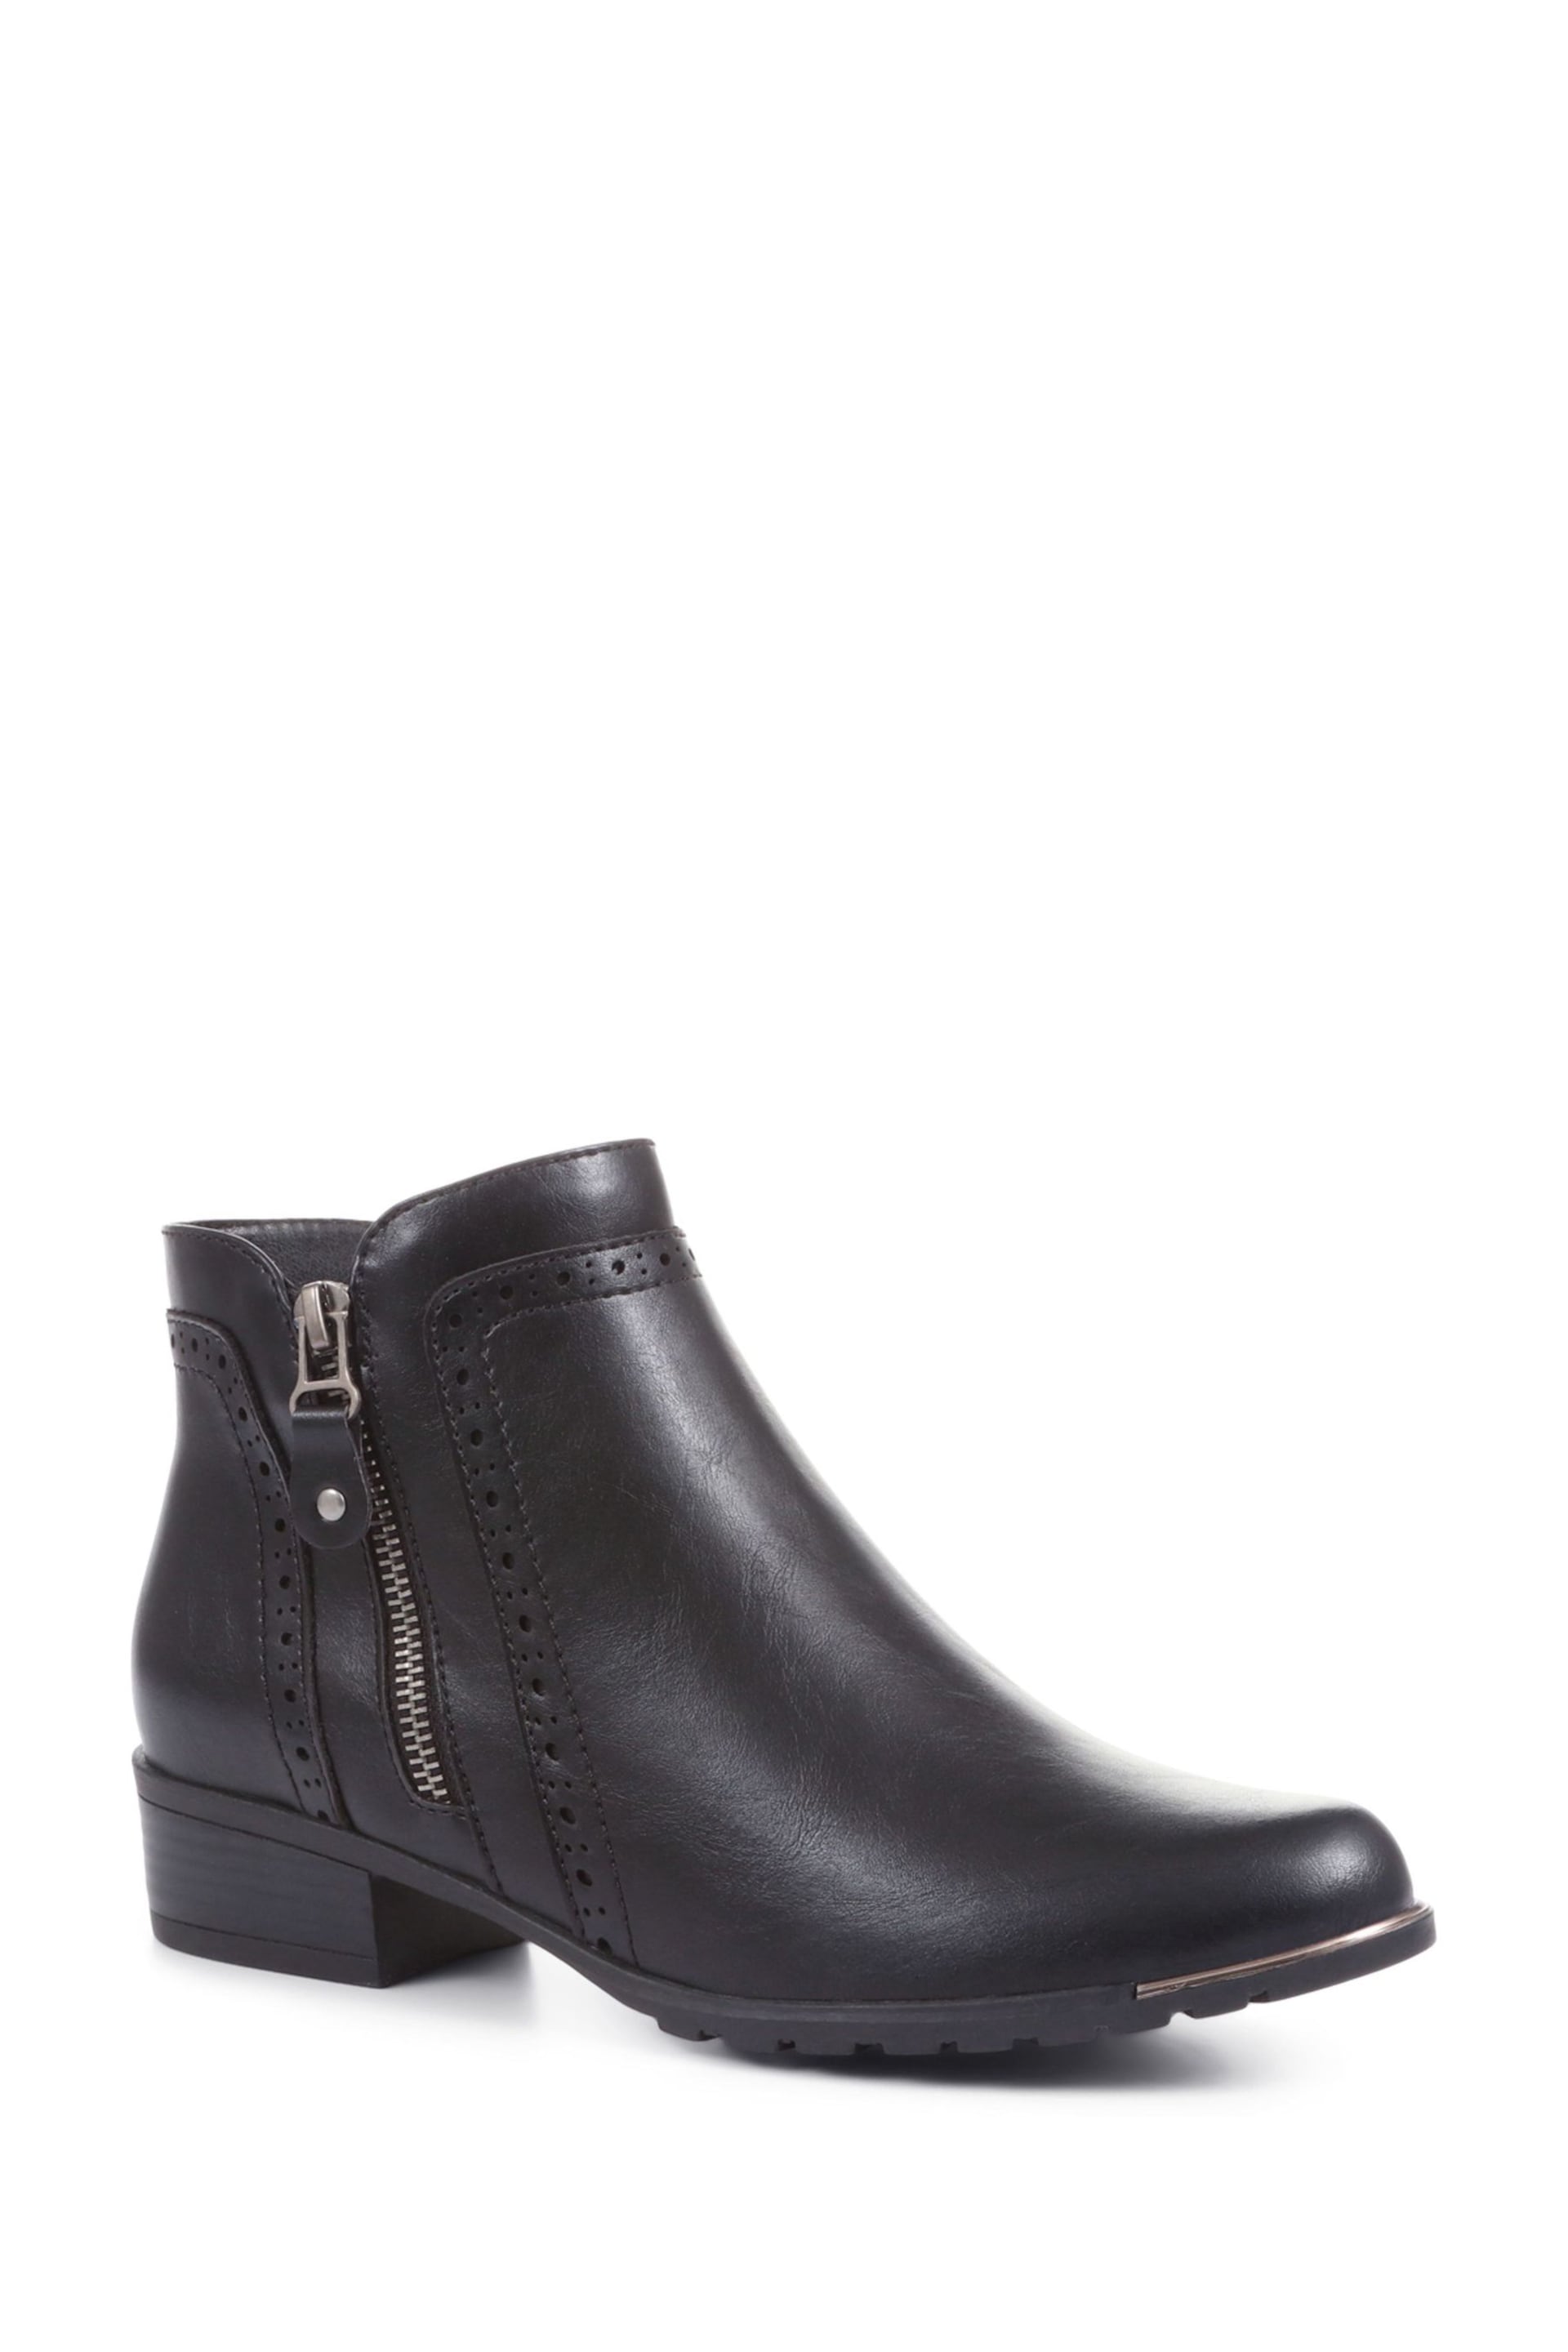 Pavers Black Chunky Ankle Boots - Image 2 of 5